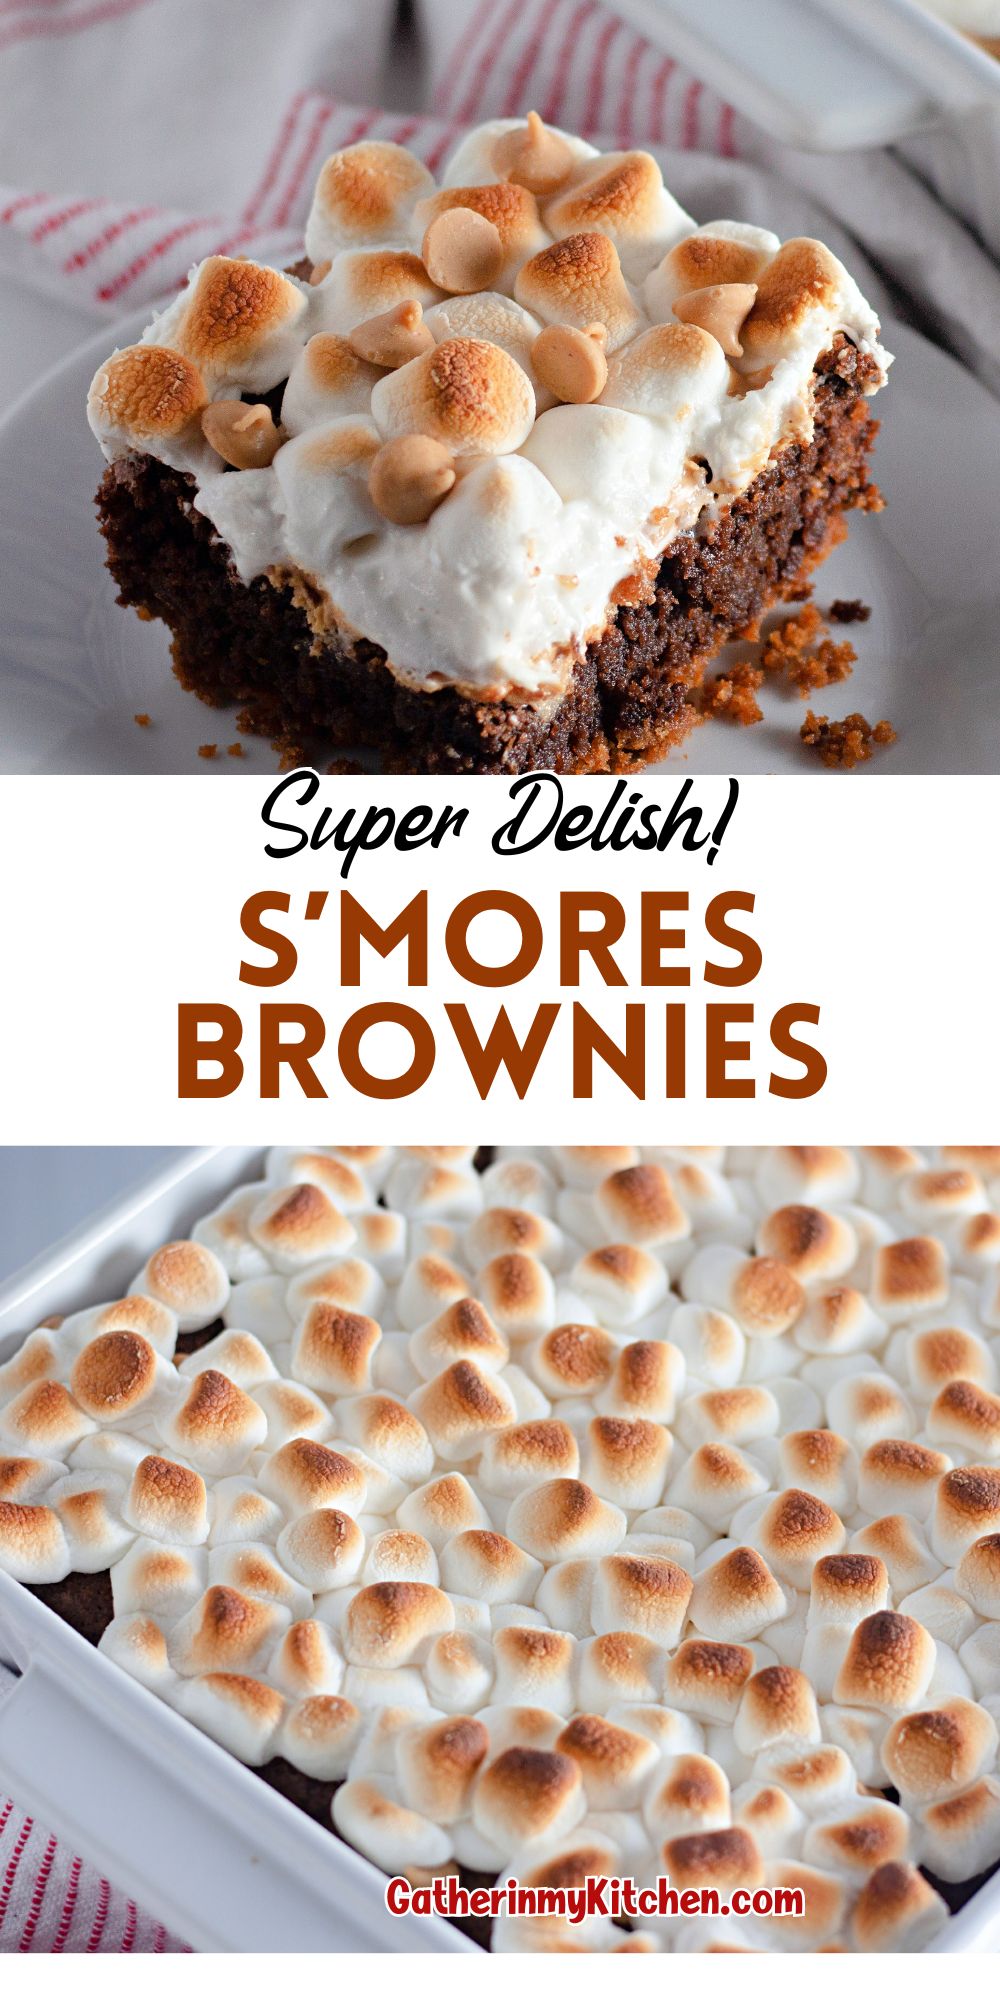 Pin image: top has slice of S'mores brownie on a plate, middle says "Super Delish! S'mores Brownies" and bottom has S'mores brownies in baking dish just out of the oven.